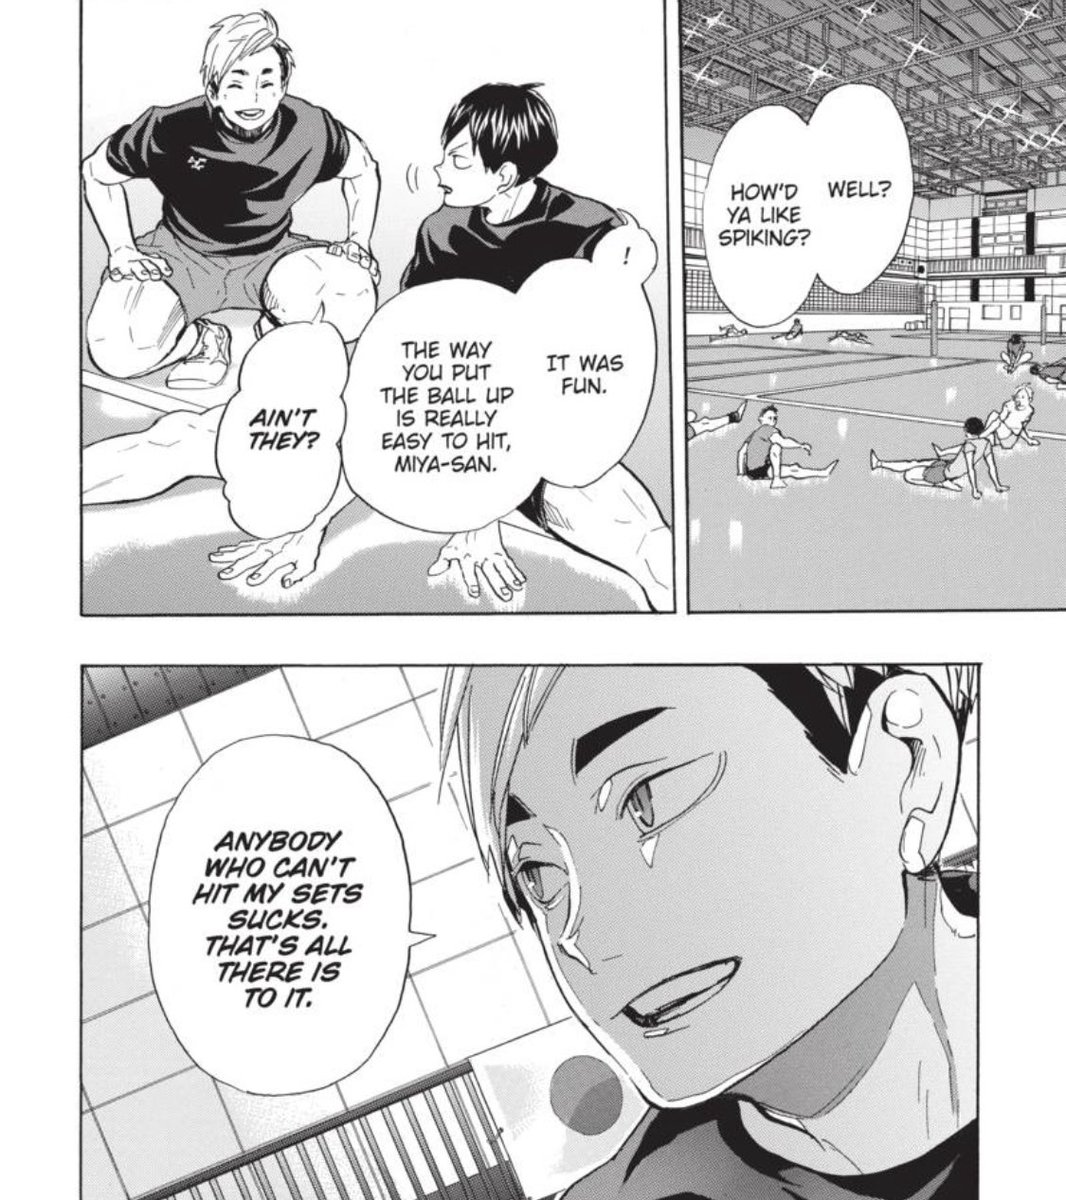 to put it simply, i summed up their recurring mottos as follows:oikawa: pull 100% out of the spikers’ abilitiesatsumu: make the ball as easy to hit as possible (and anyone who can’t, sucks)